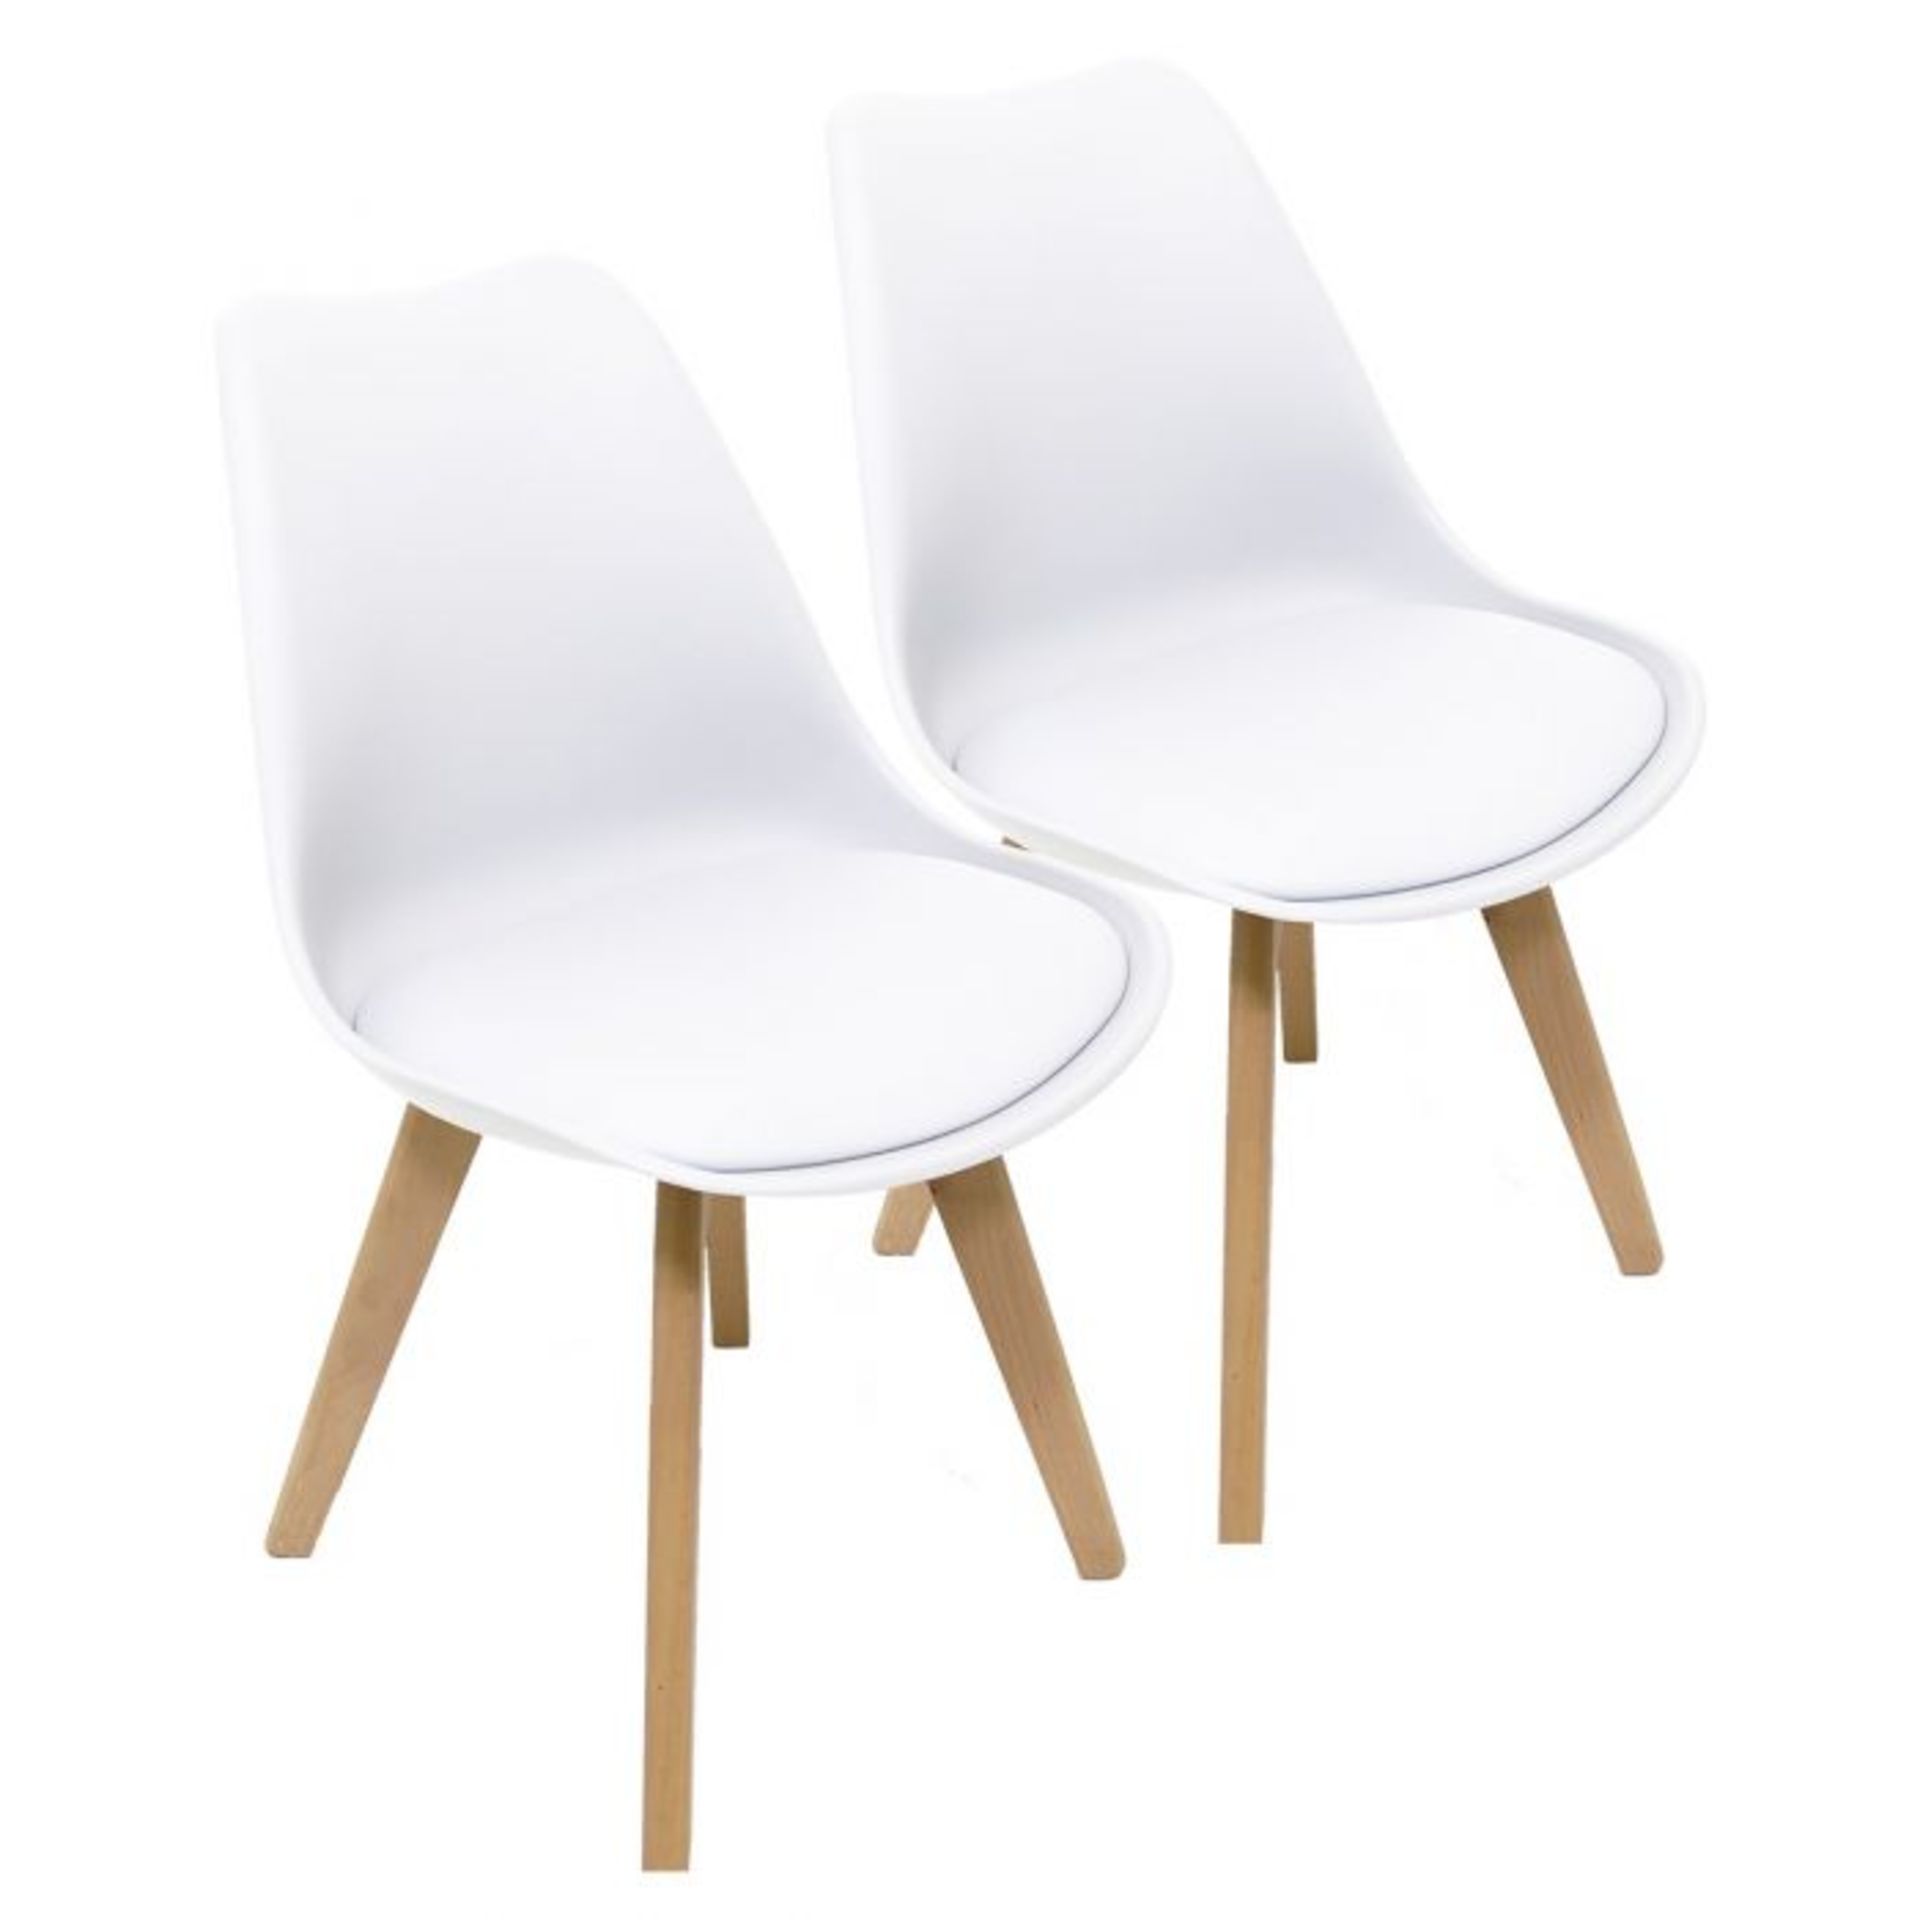 4X BOXED TULIP STYLE CHAIRS WHITE PLASTIC AND NATURAL WOODEN CHAIRS RRP £180.00 (AS SEEN IN